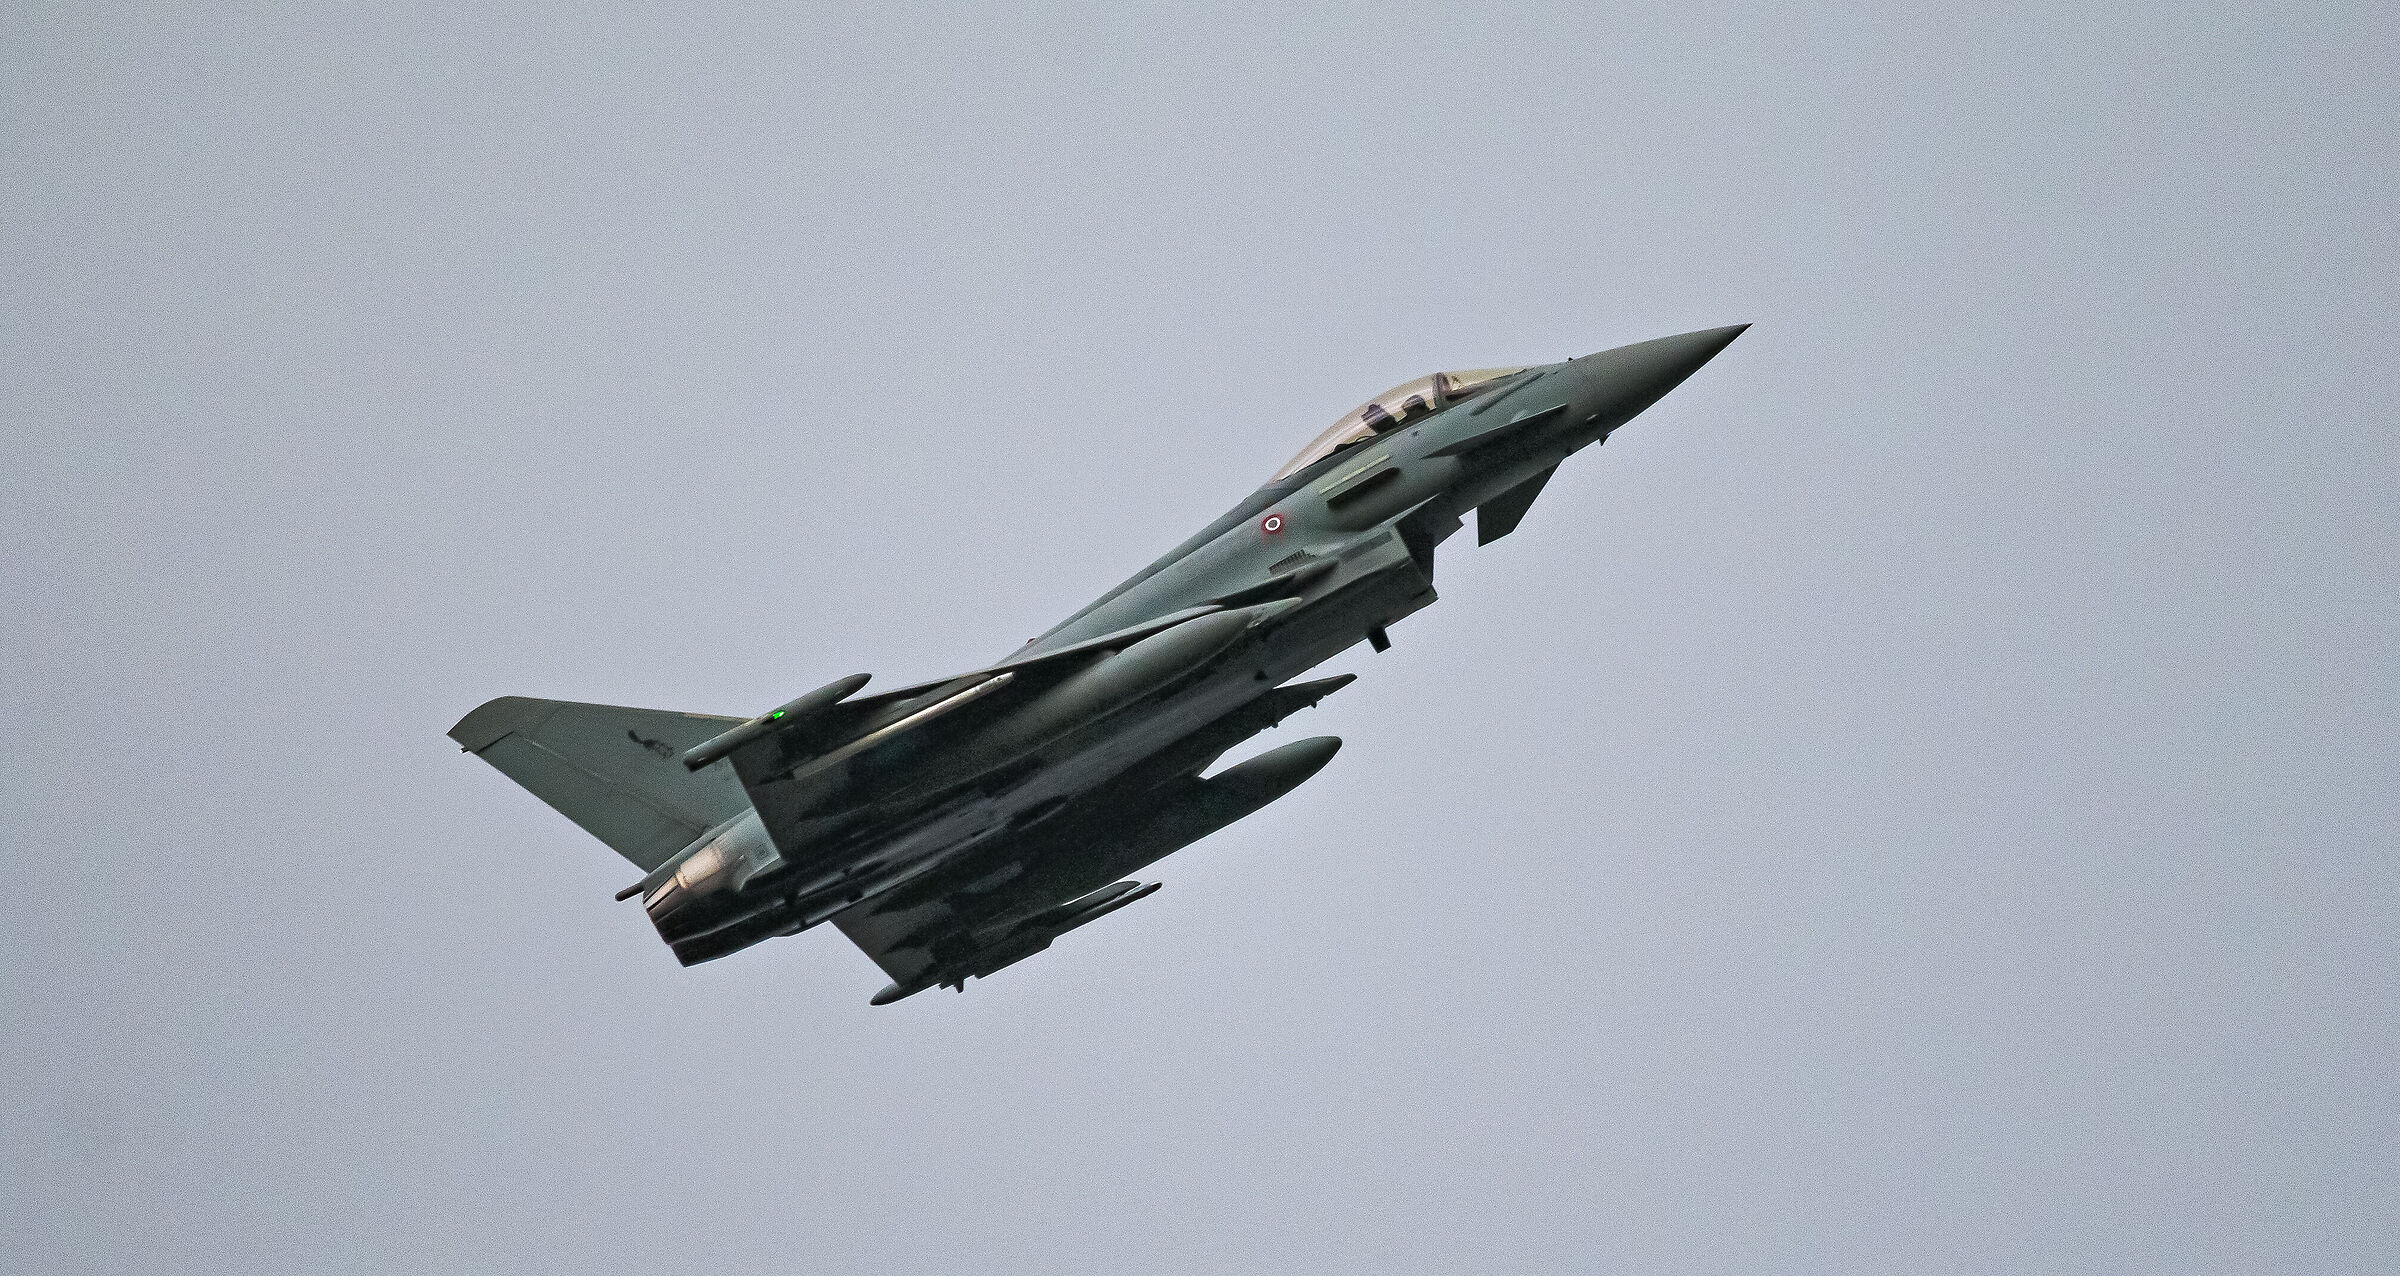 Eurofighter above house...